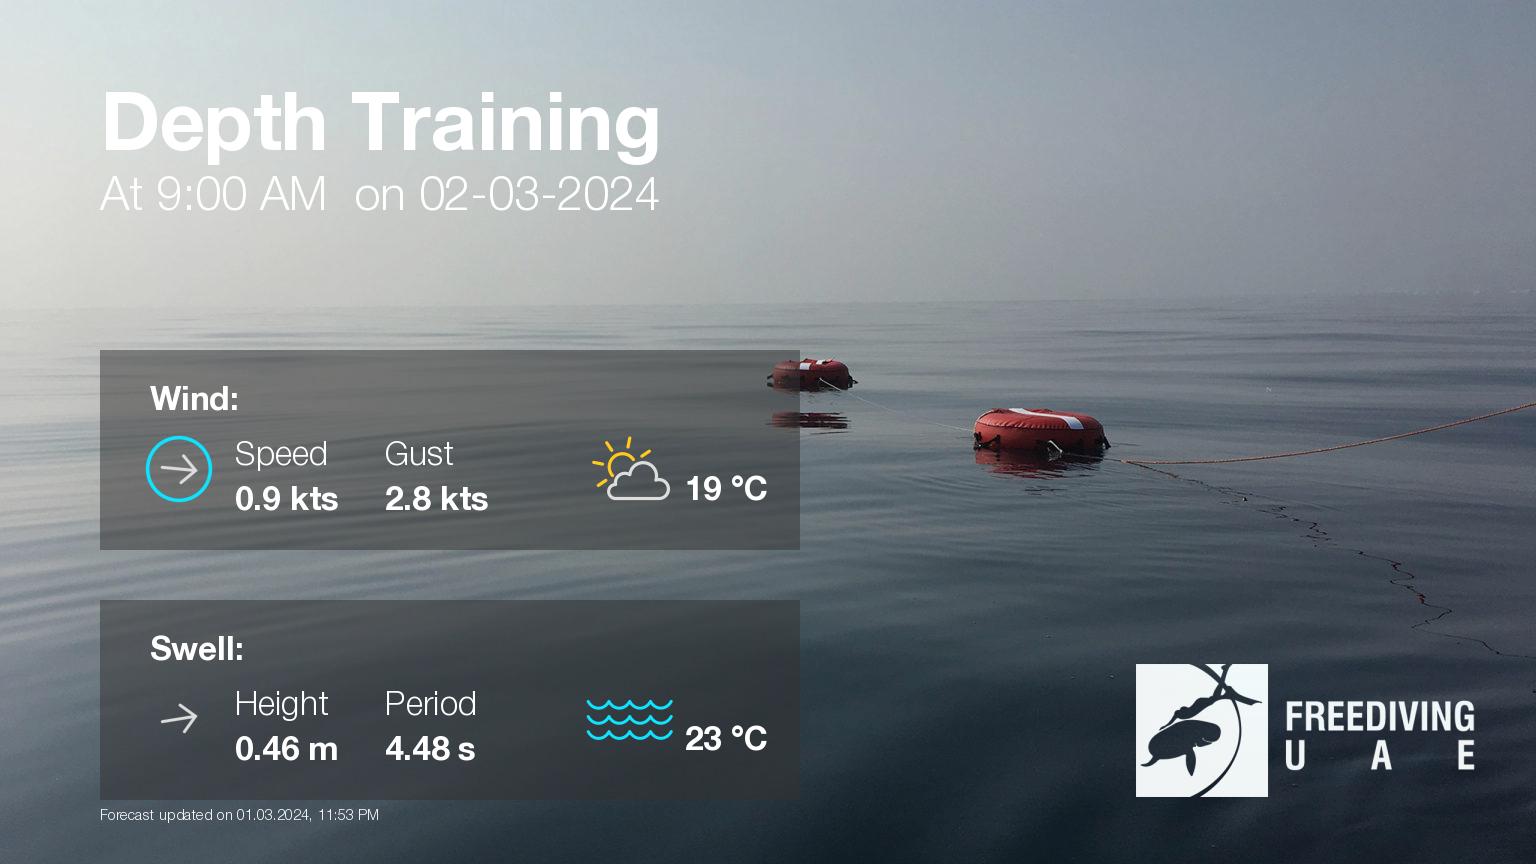 Expected weather during Depth Training on Sat, Mar 2, at 9:00 AM